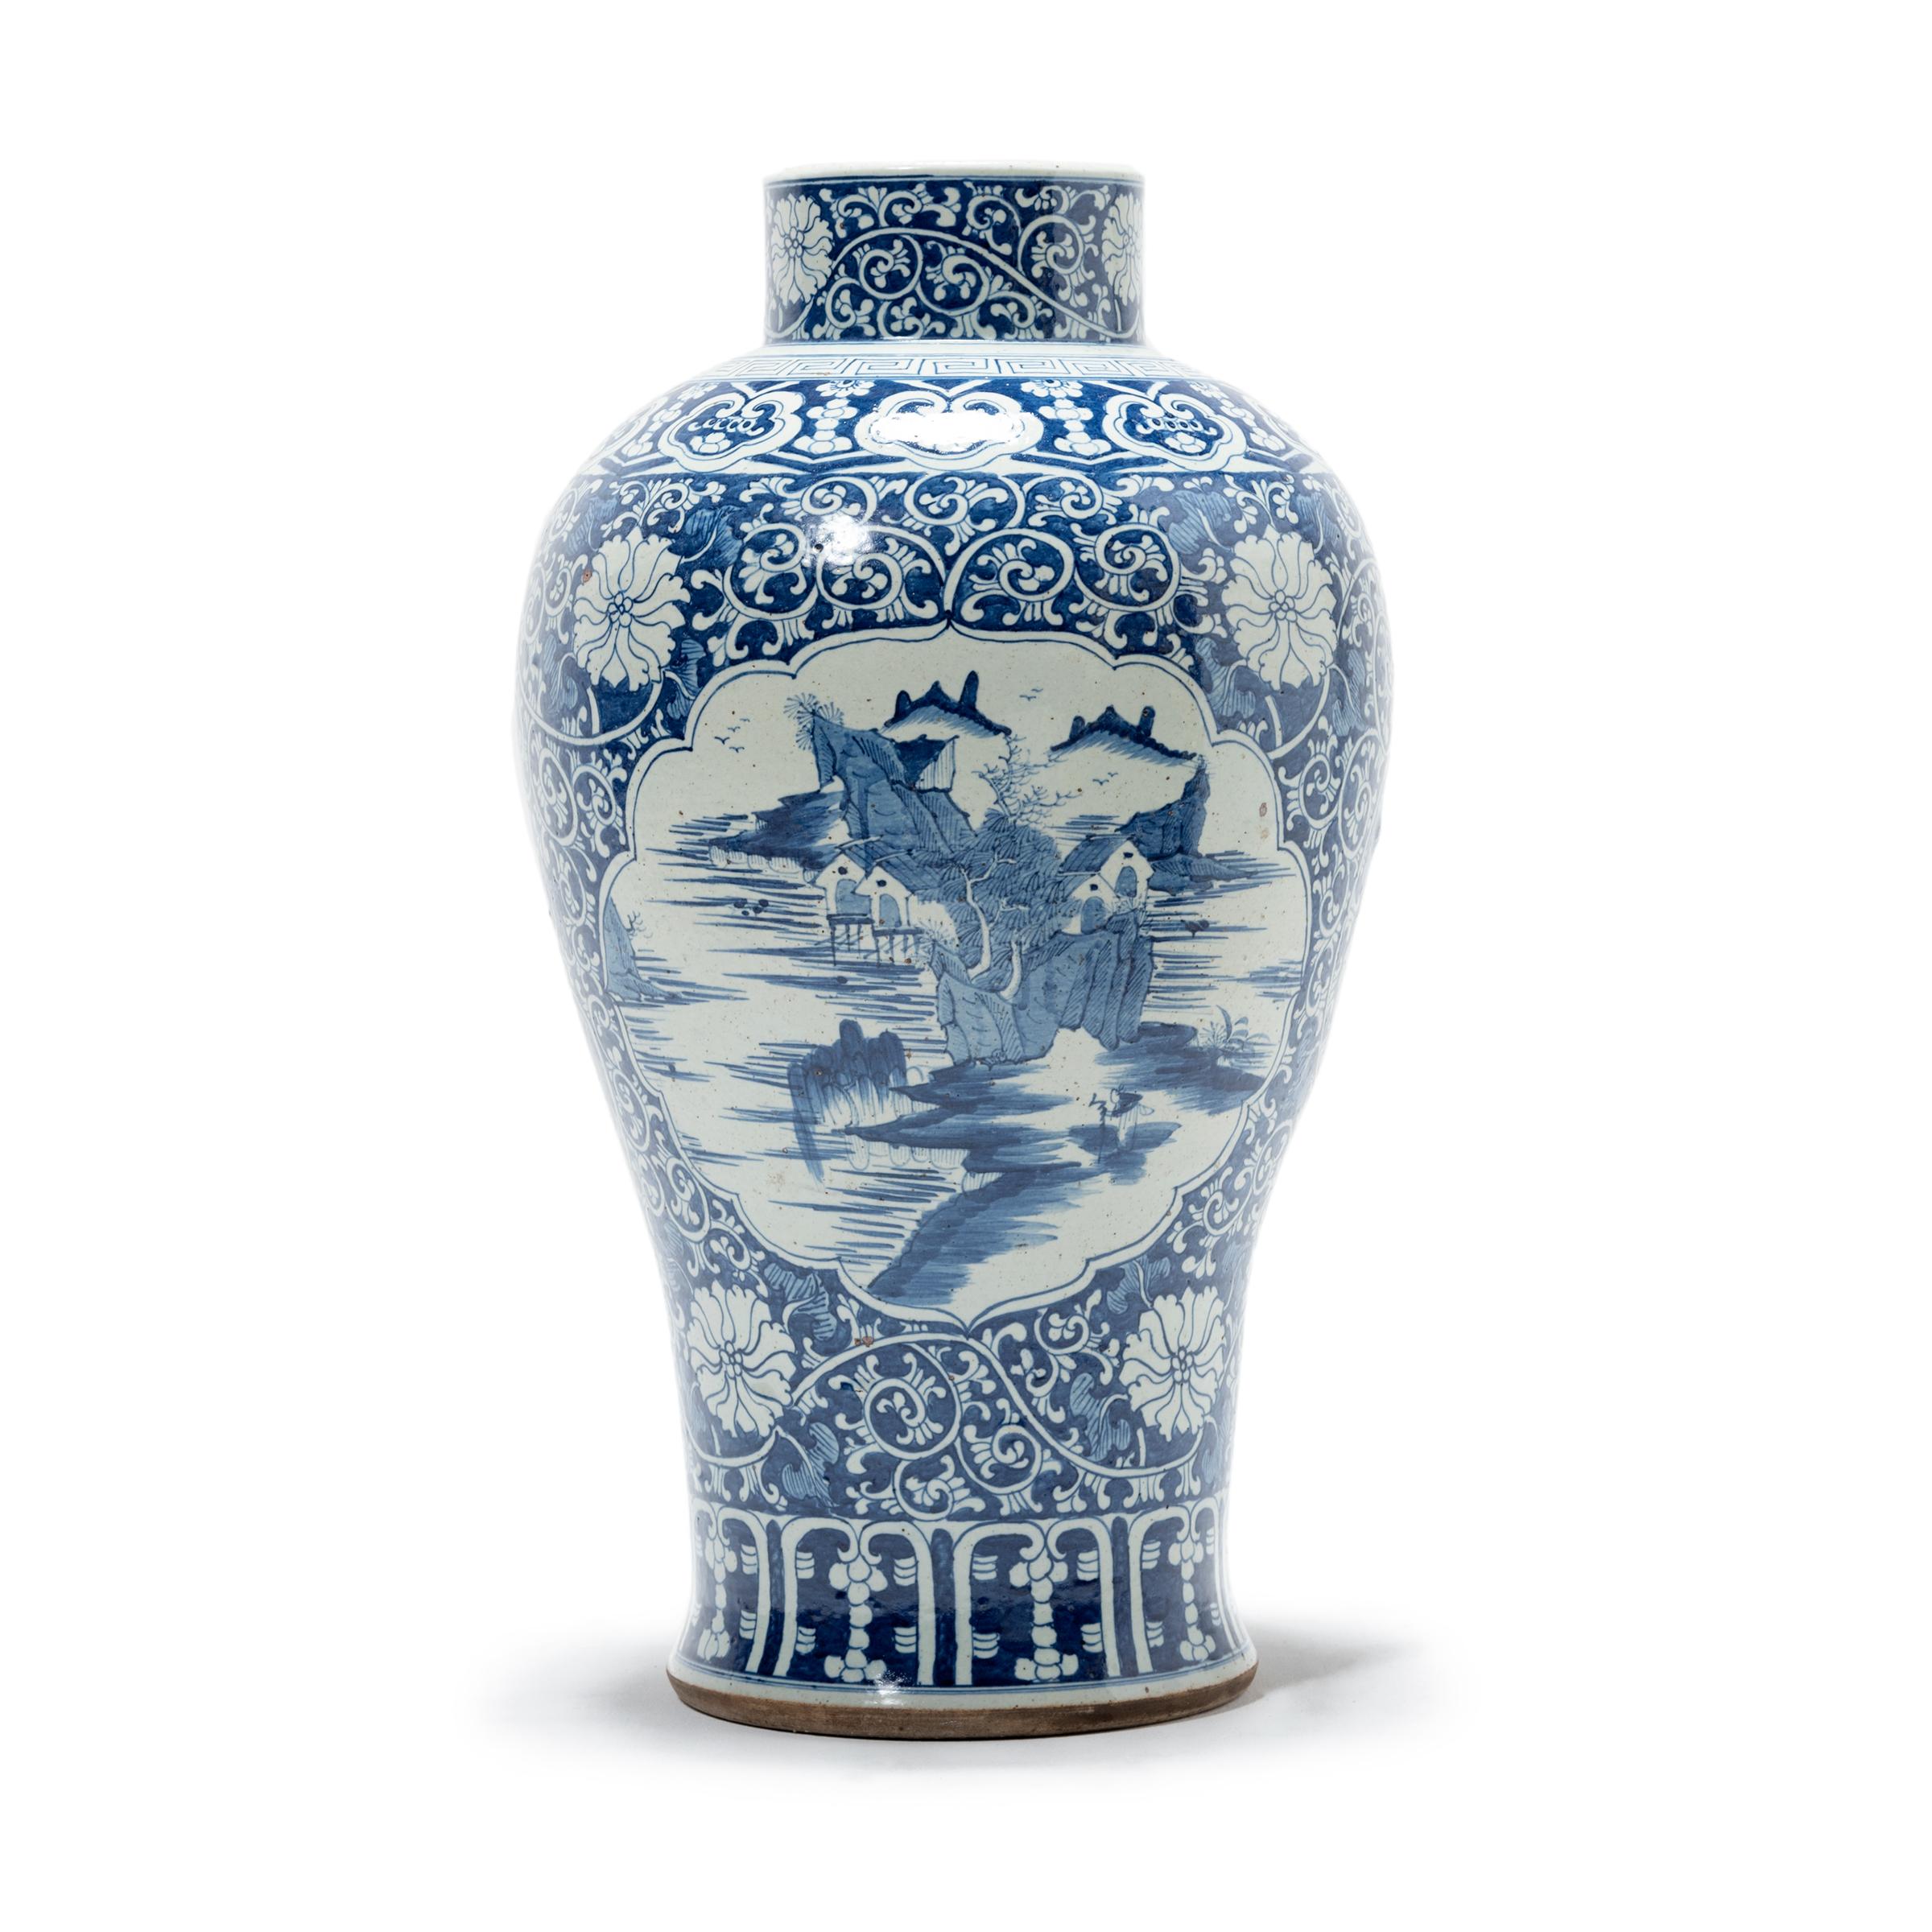 This is a monumental blue and white meiping-form vase painted by hand with a landscape scene surrounded by a floral vine motif. The cobalt oxide used to create the blue decorations was introduced to China thousands of years ago by Islamic merchants.